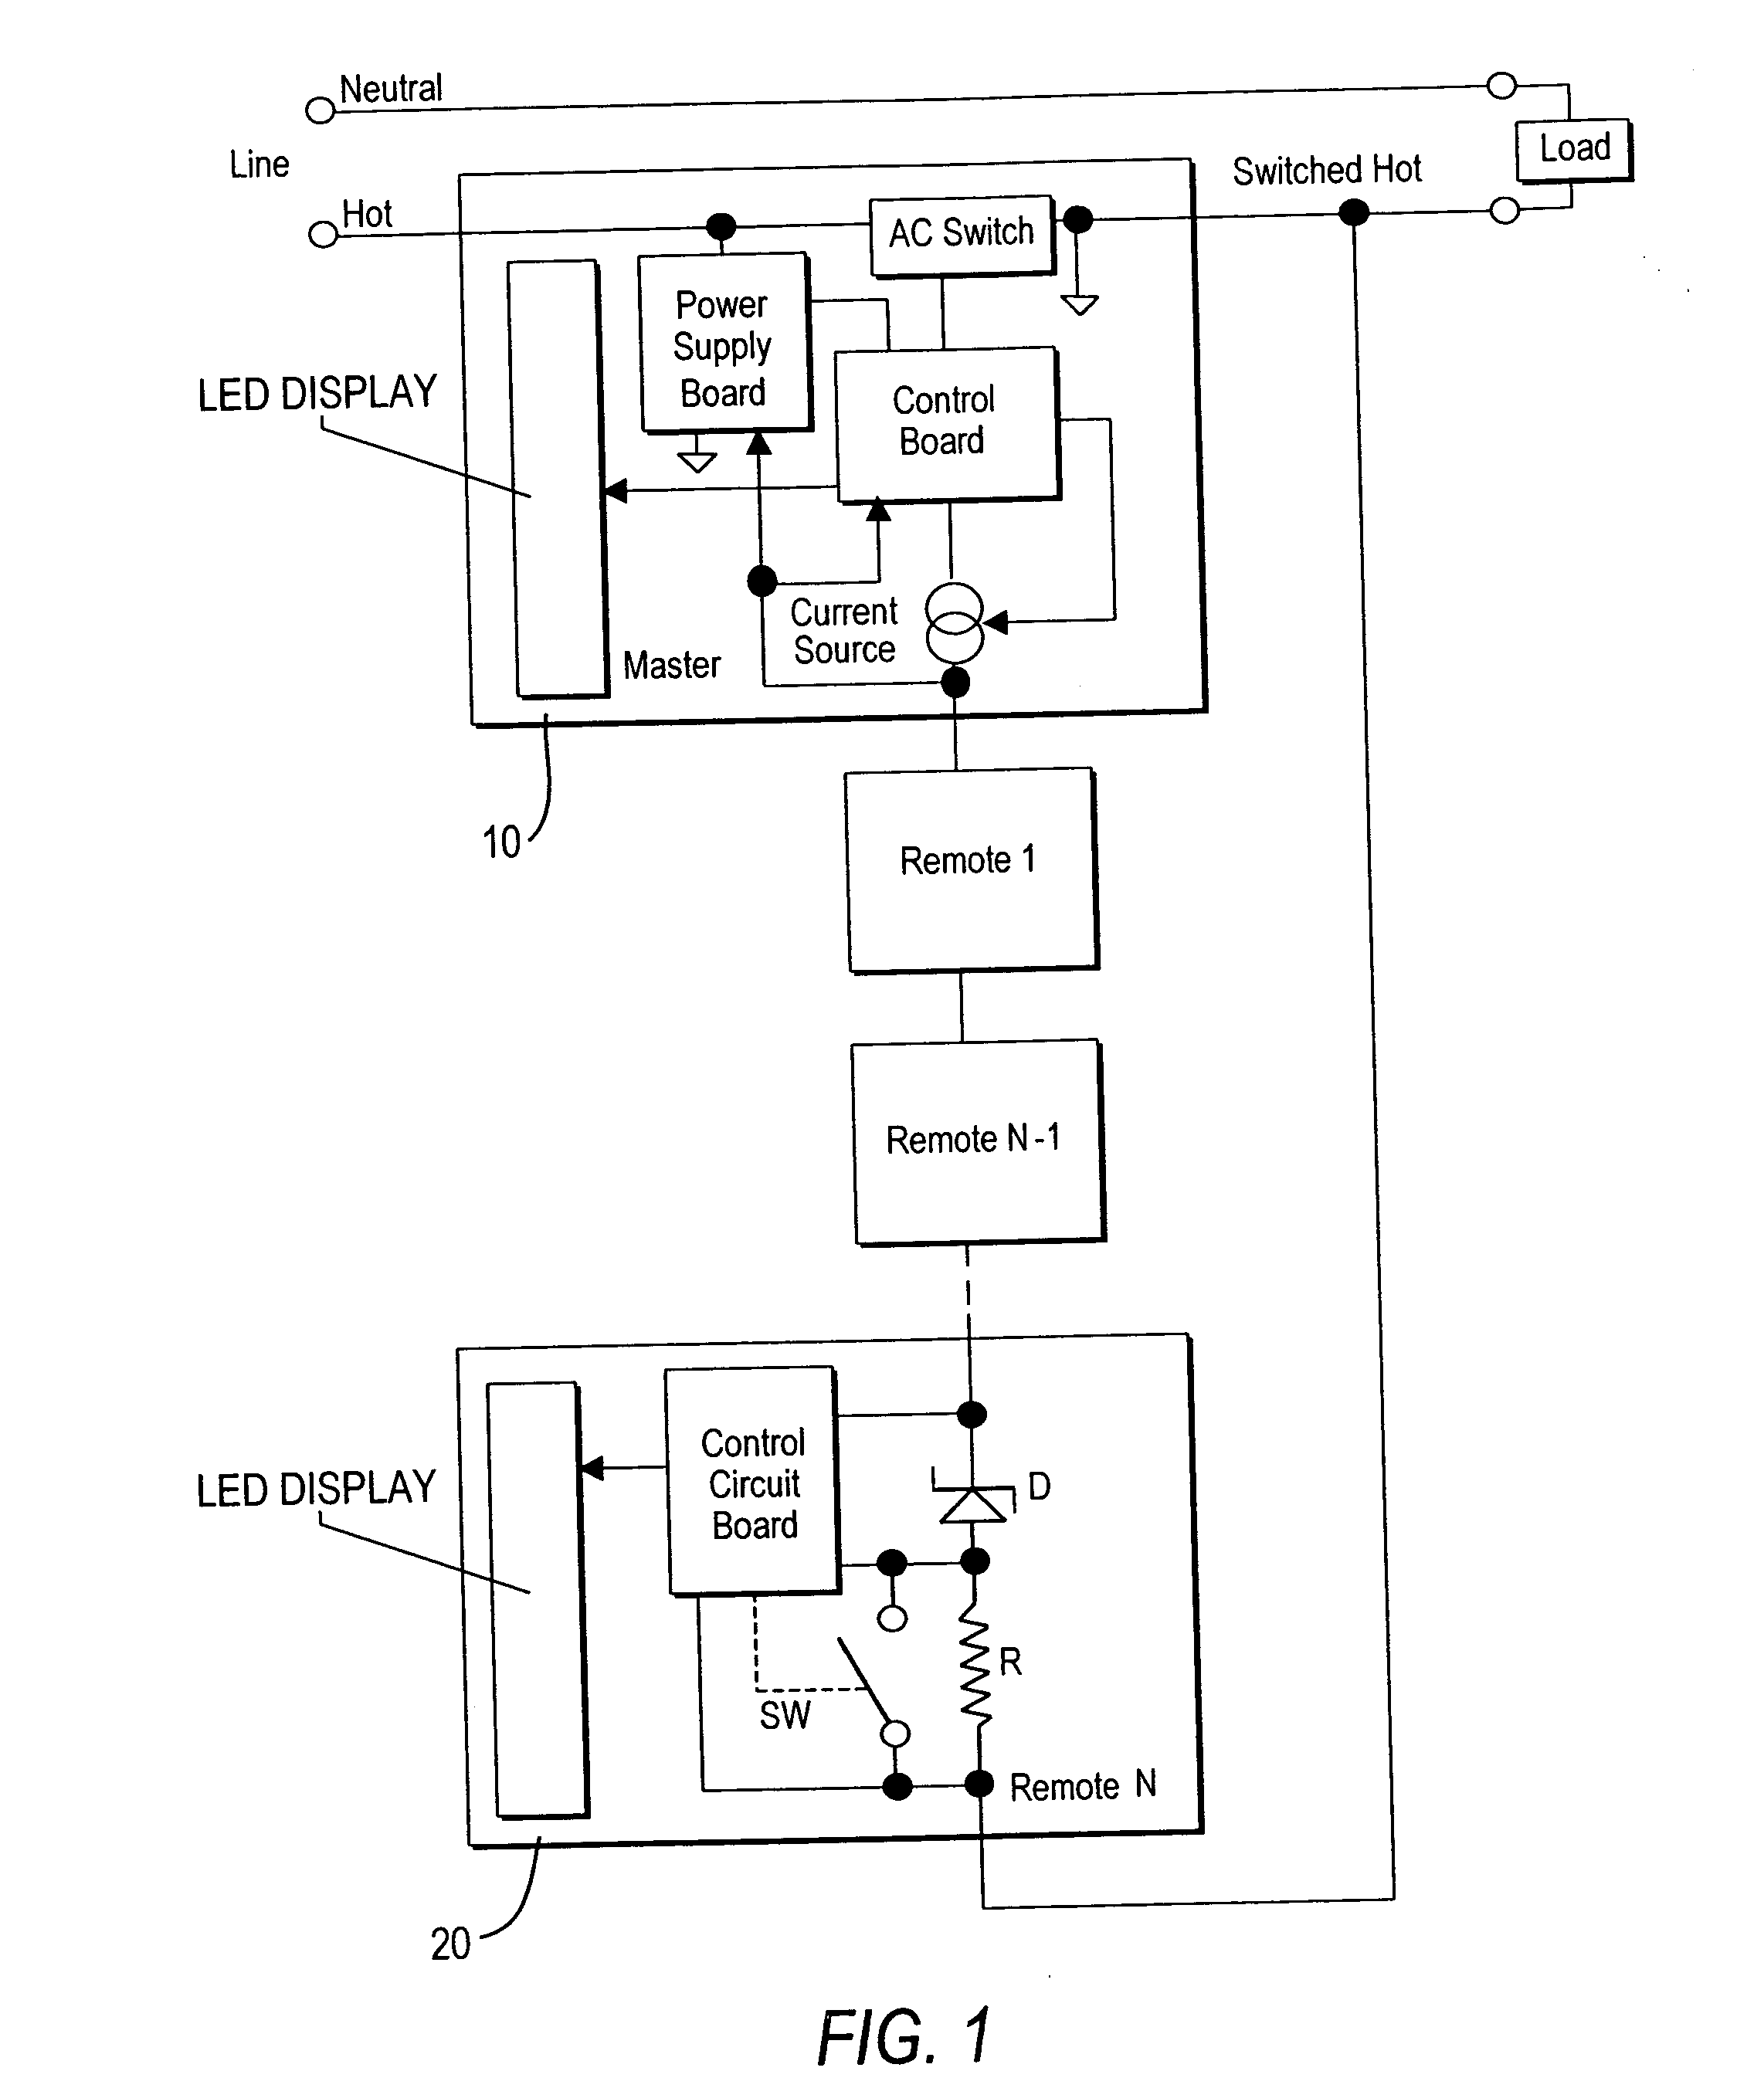 Dimmer control system with tandem power supplies